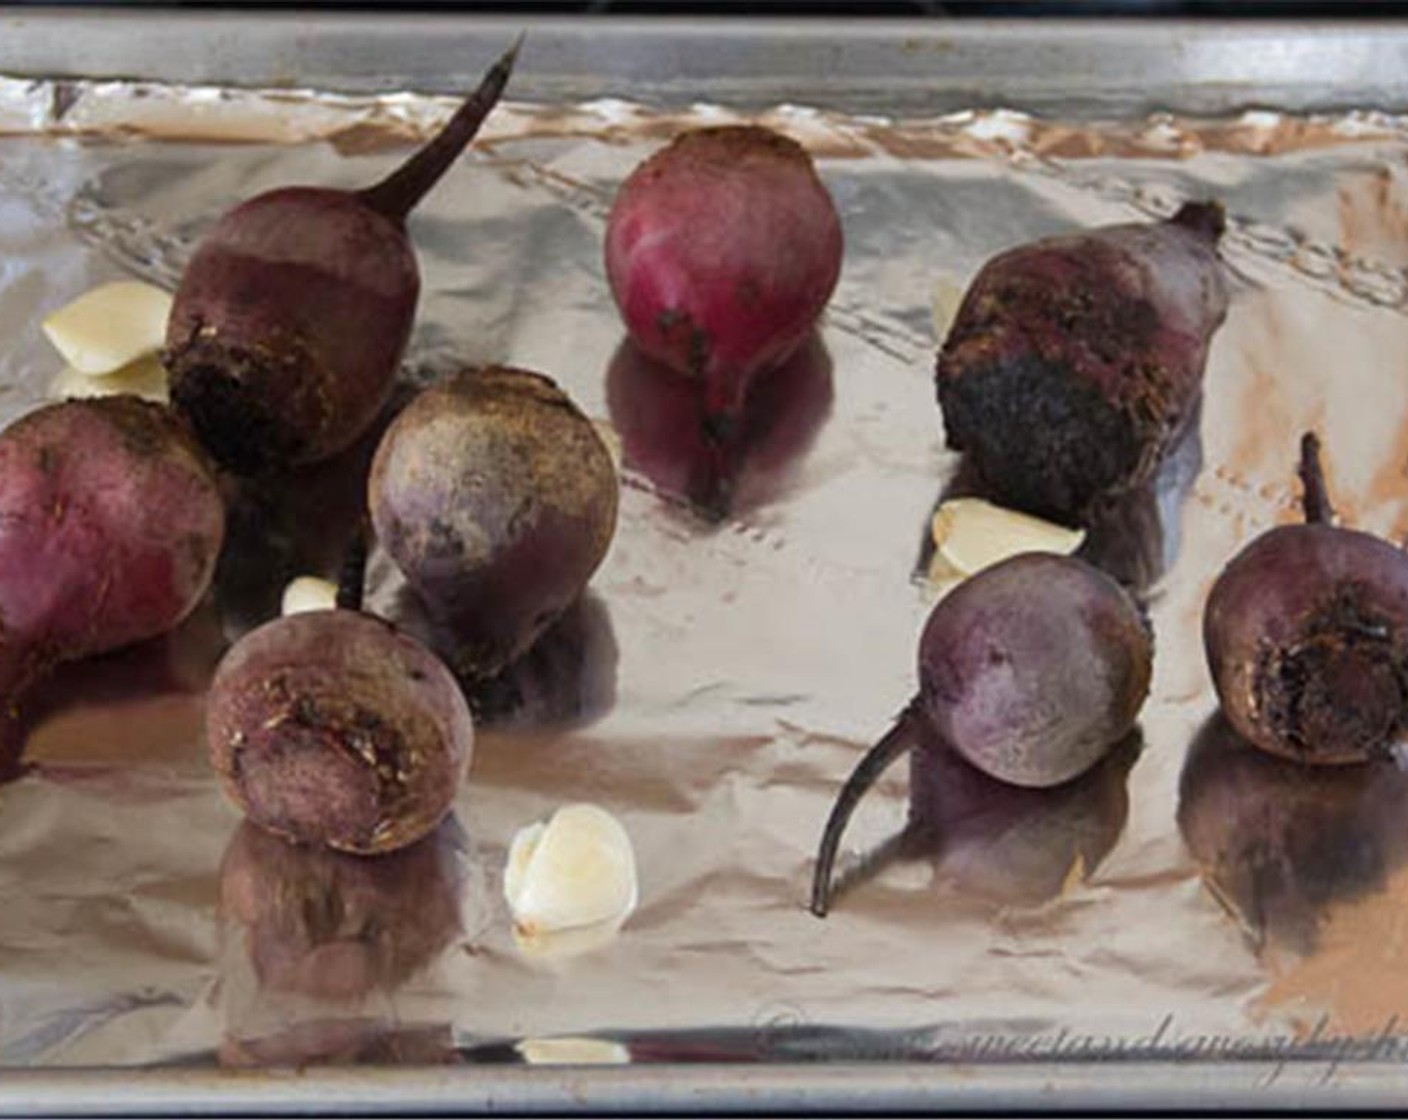 step 2 Place the Beets (7) and Garlic (3 cloves) on greased baking sheet. Roast the beets for about an hour, or until fork-tender.